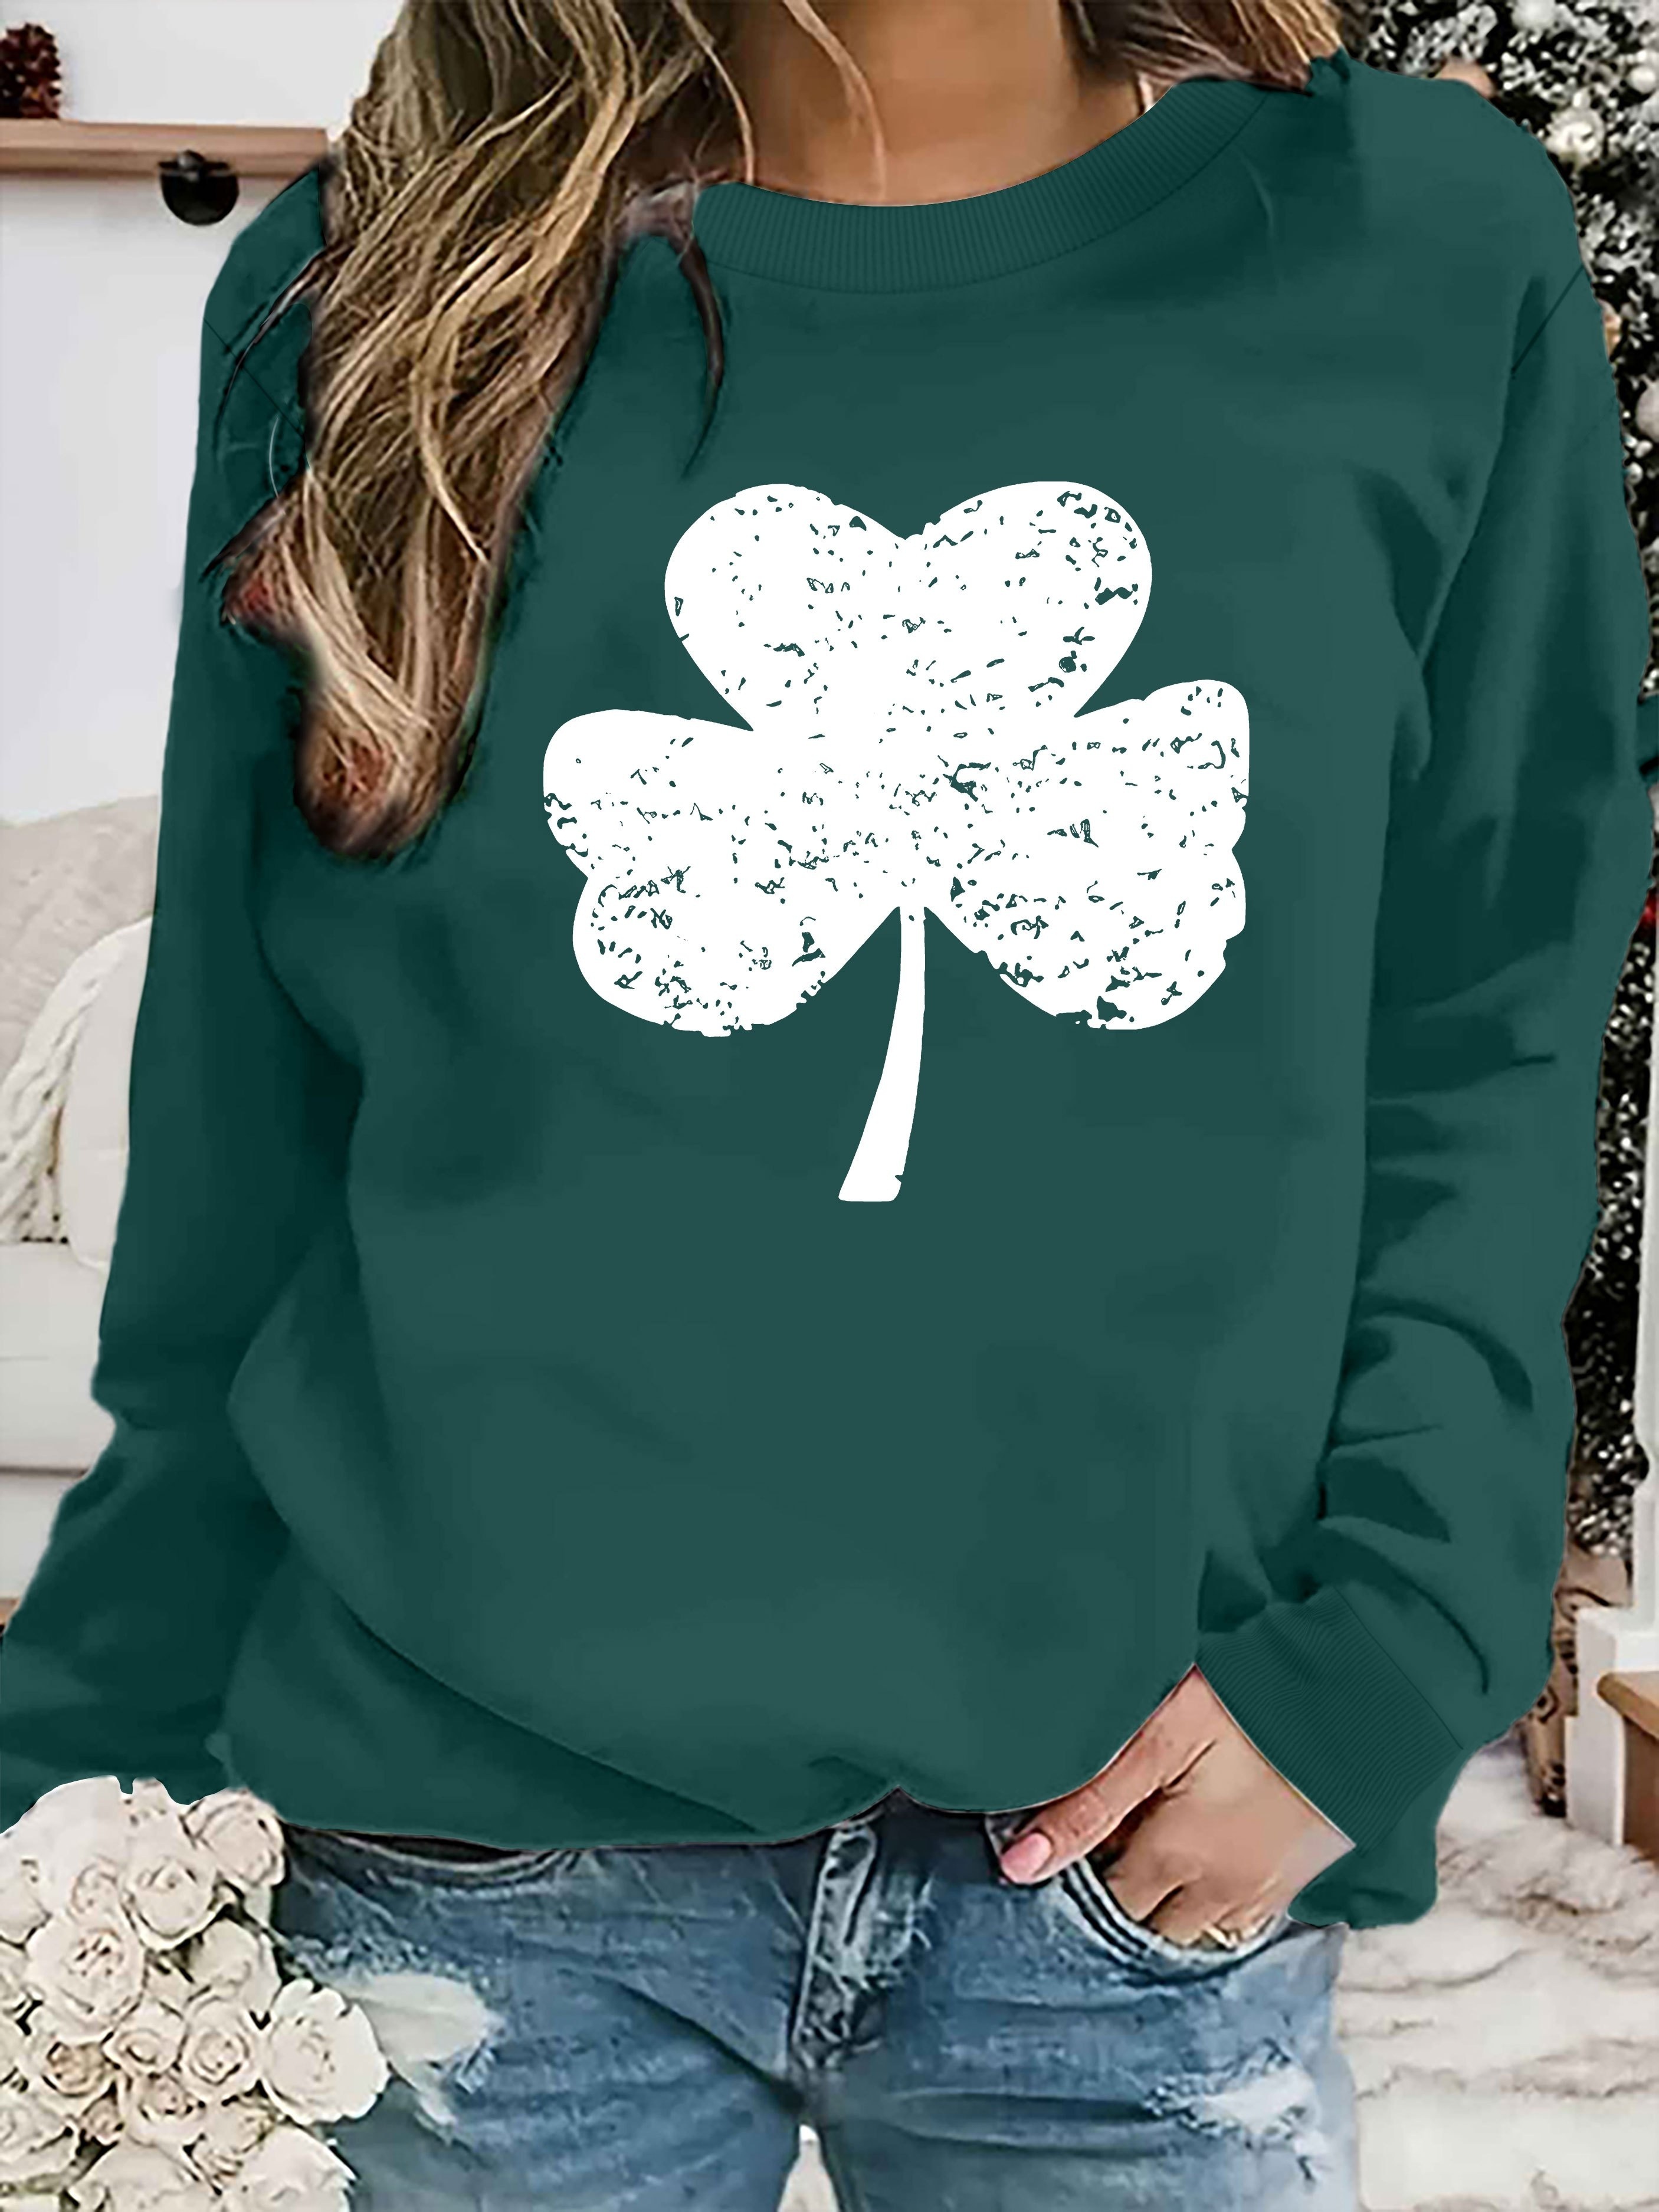 JWZUY Mens St. Patrick's Day Pullover Crewneck Long Sleeve Holiday